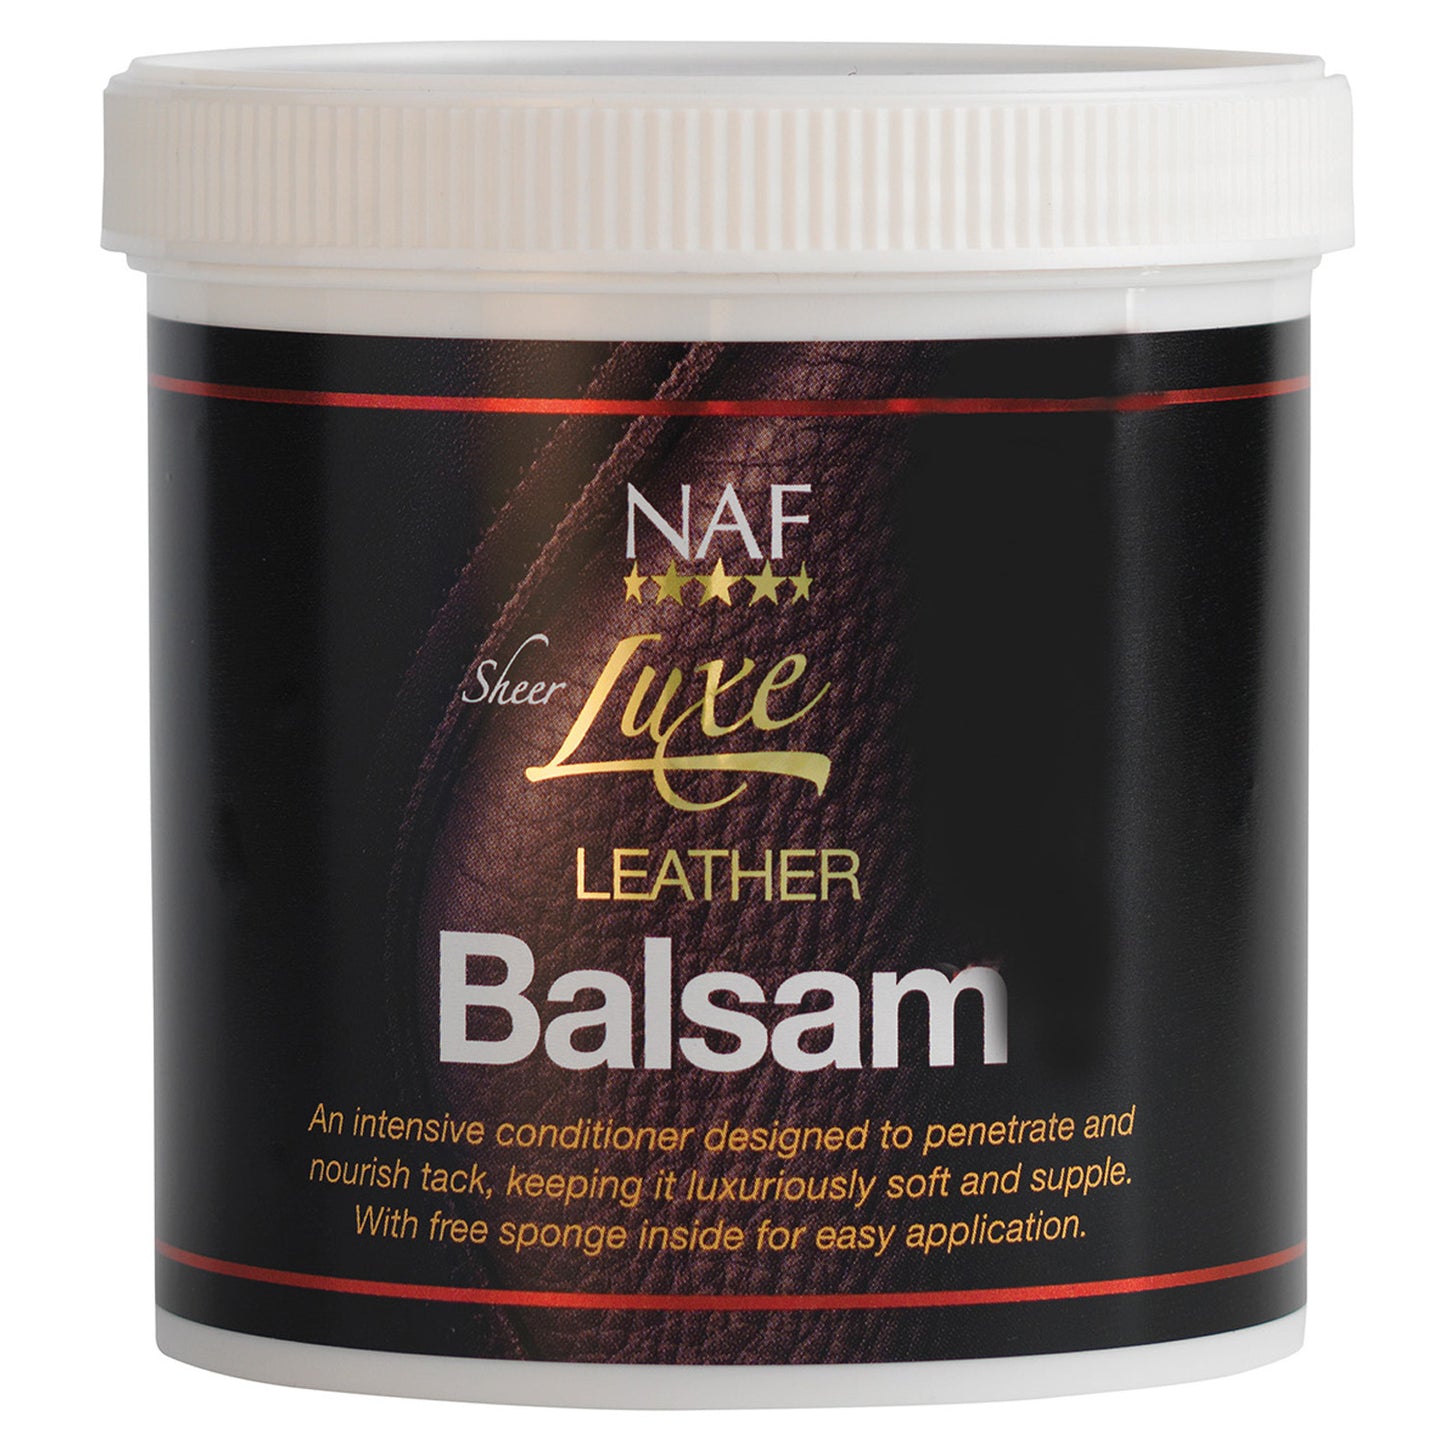 NAF SHEER LUXE LEATHER BALSAM